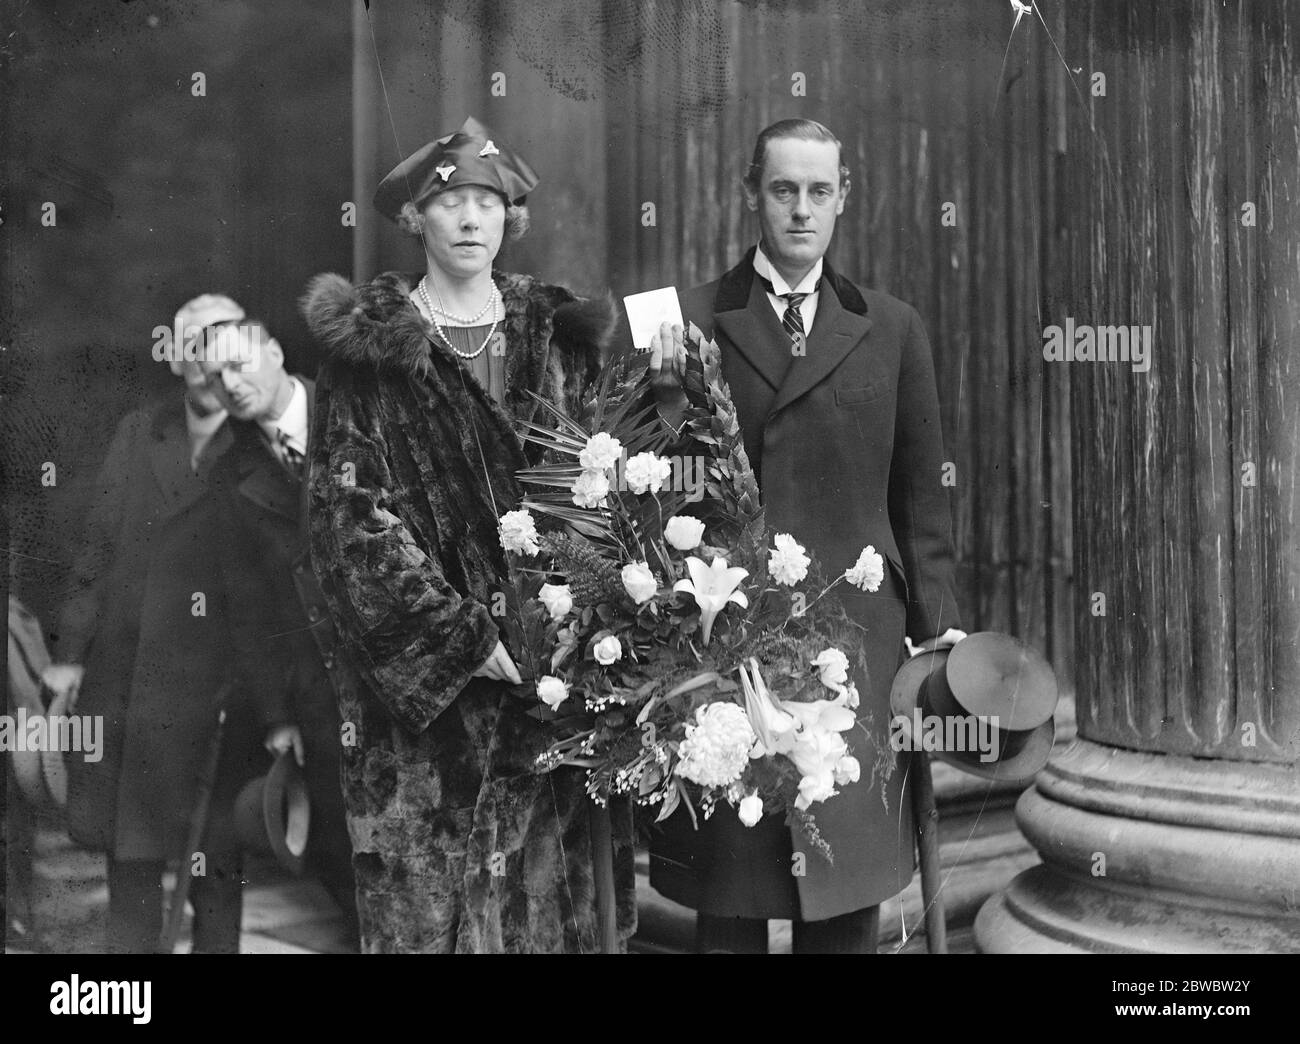 Navy league wreat laid on Nelson ' s tomb in St Paul ' s Cathedral by Marchioness of Linlithgow The Marquish and Marchioness of Linlithgow arriving at St Paul ' s with the wreath 21 October 1925 Stock Photo